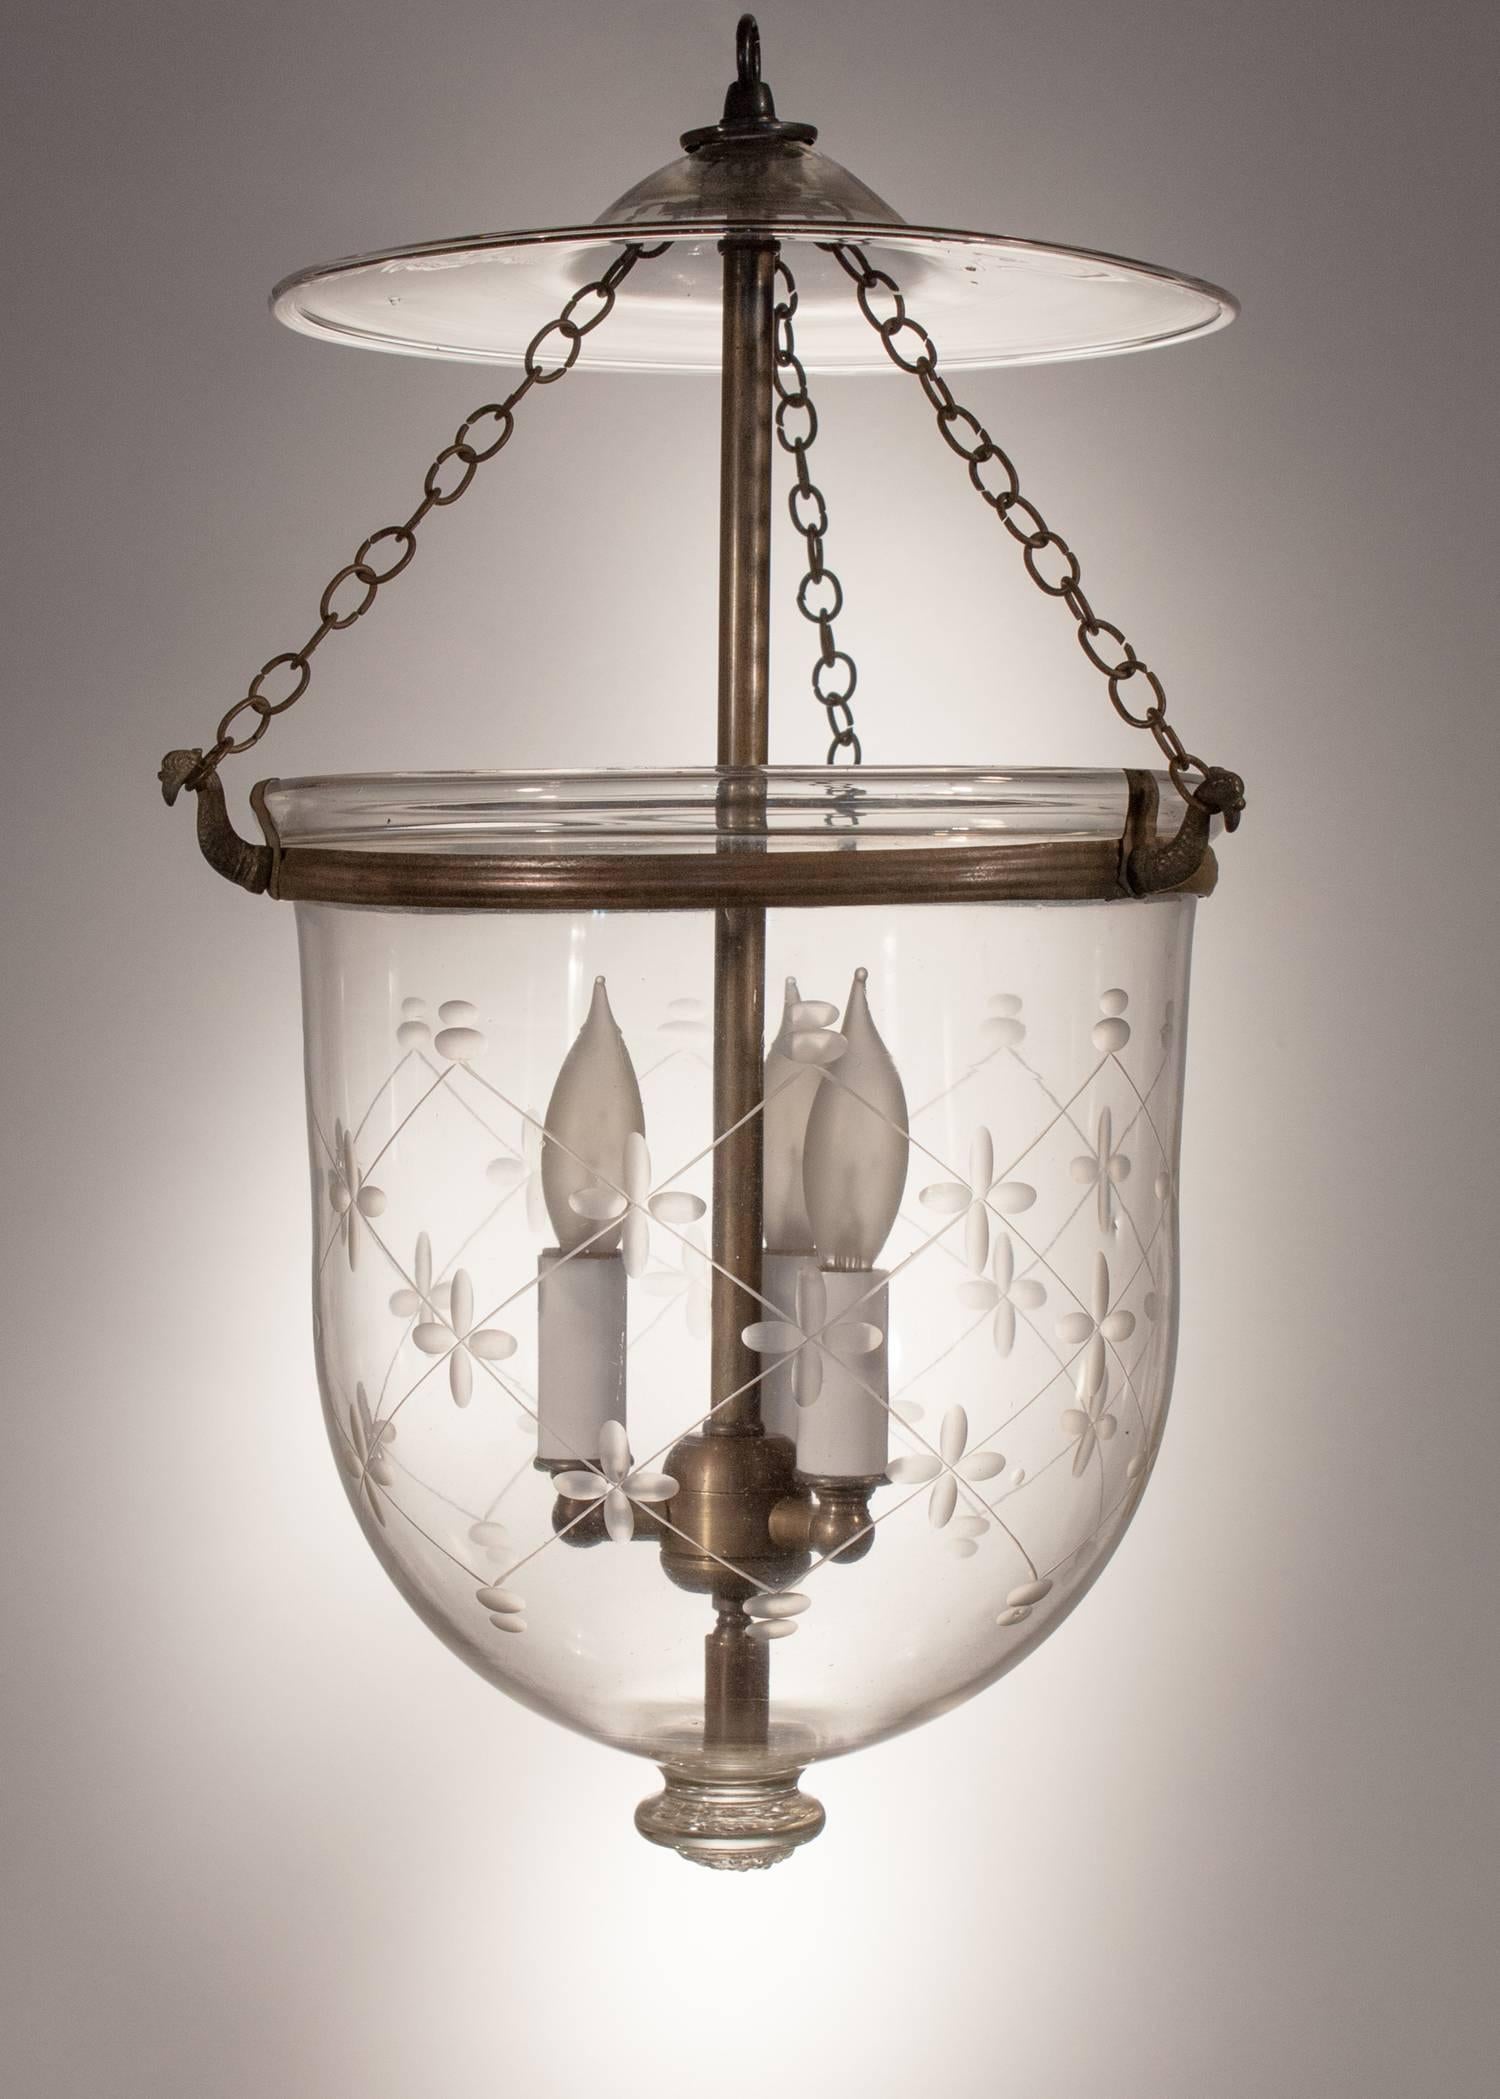 Charming 19th century bell jar lantern from England with an etched trellis pattern and original rolled brass band. This circa 1880 hall lantern features a full and appealing form, and its hand blown glass is of excellent quality. The light has been